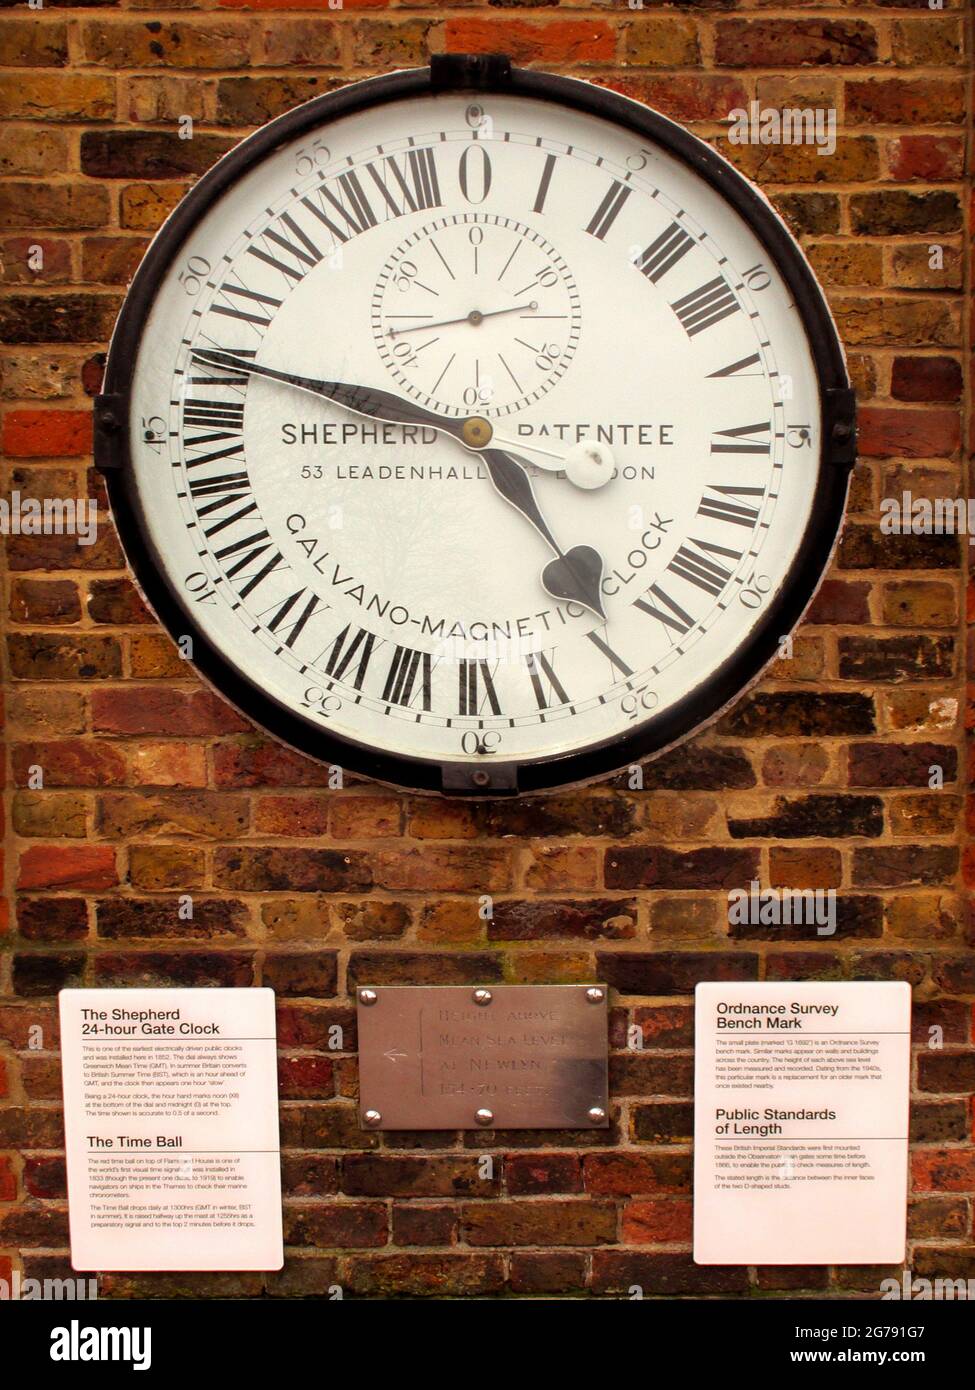 Sheperd clock at royal greenwich observatory at greenwich. Home of the prime meridian Stock Photo